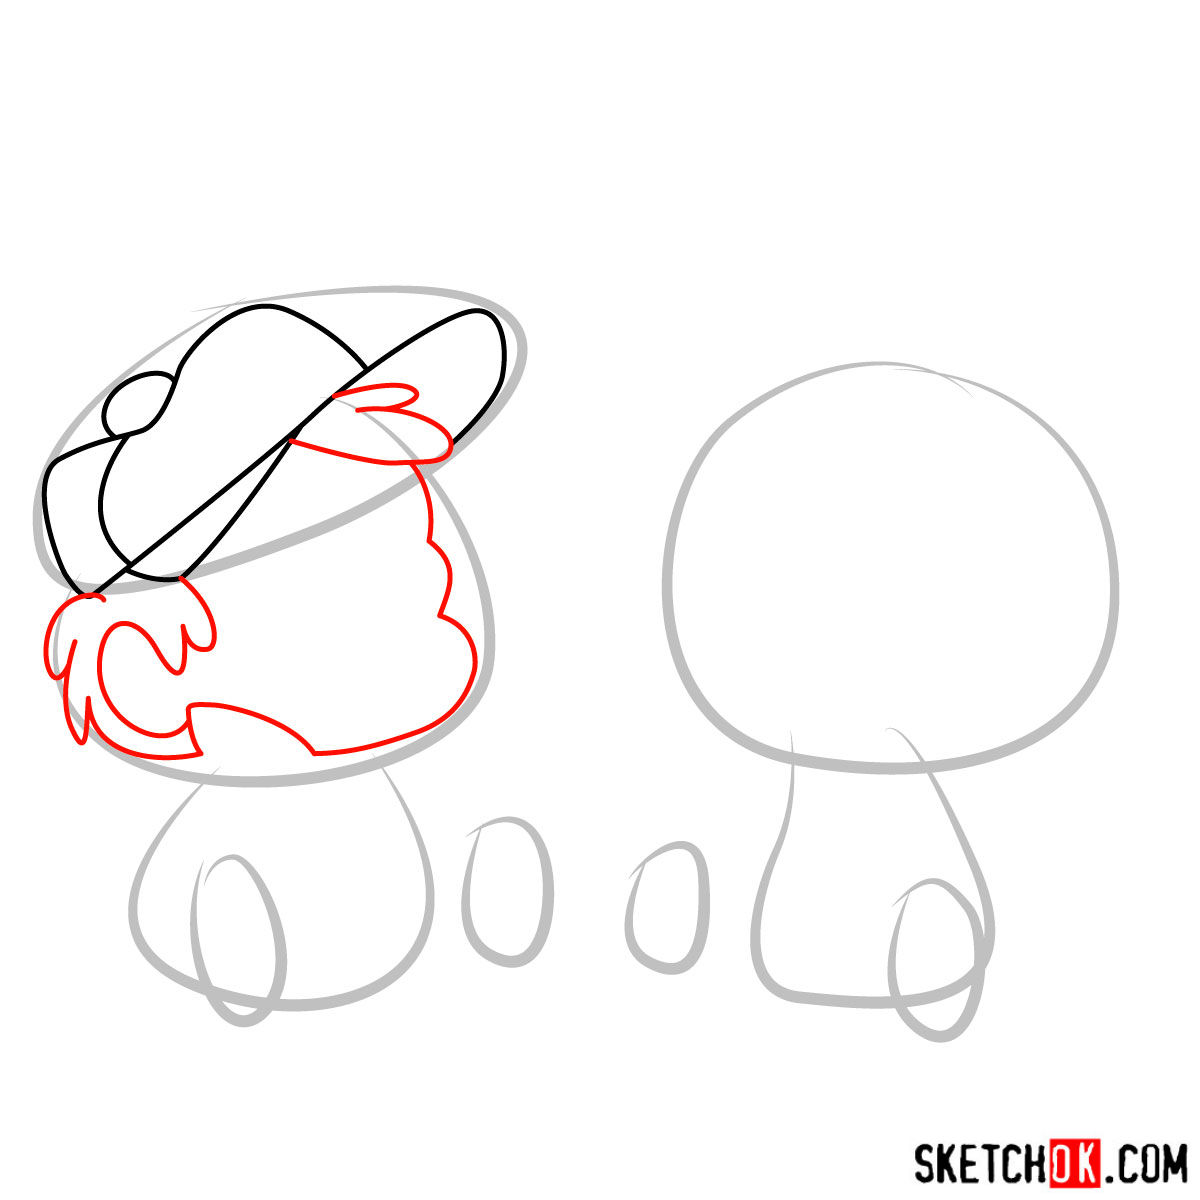 How to draw Dipper and Mabel Pines chibi style - step 03